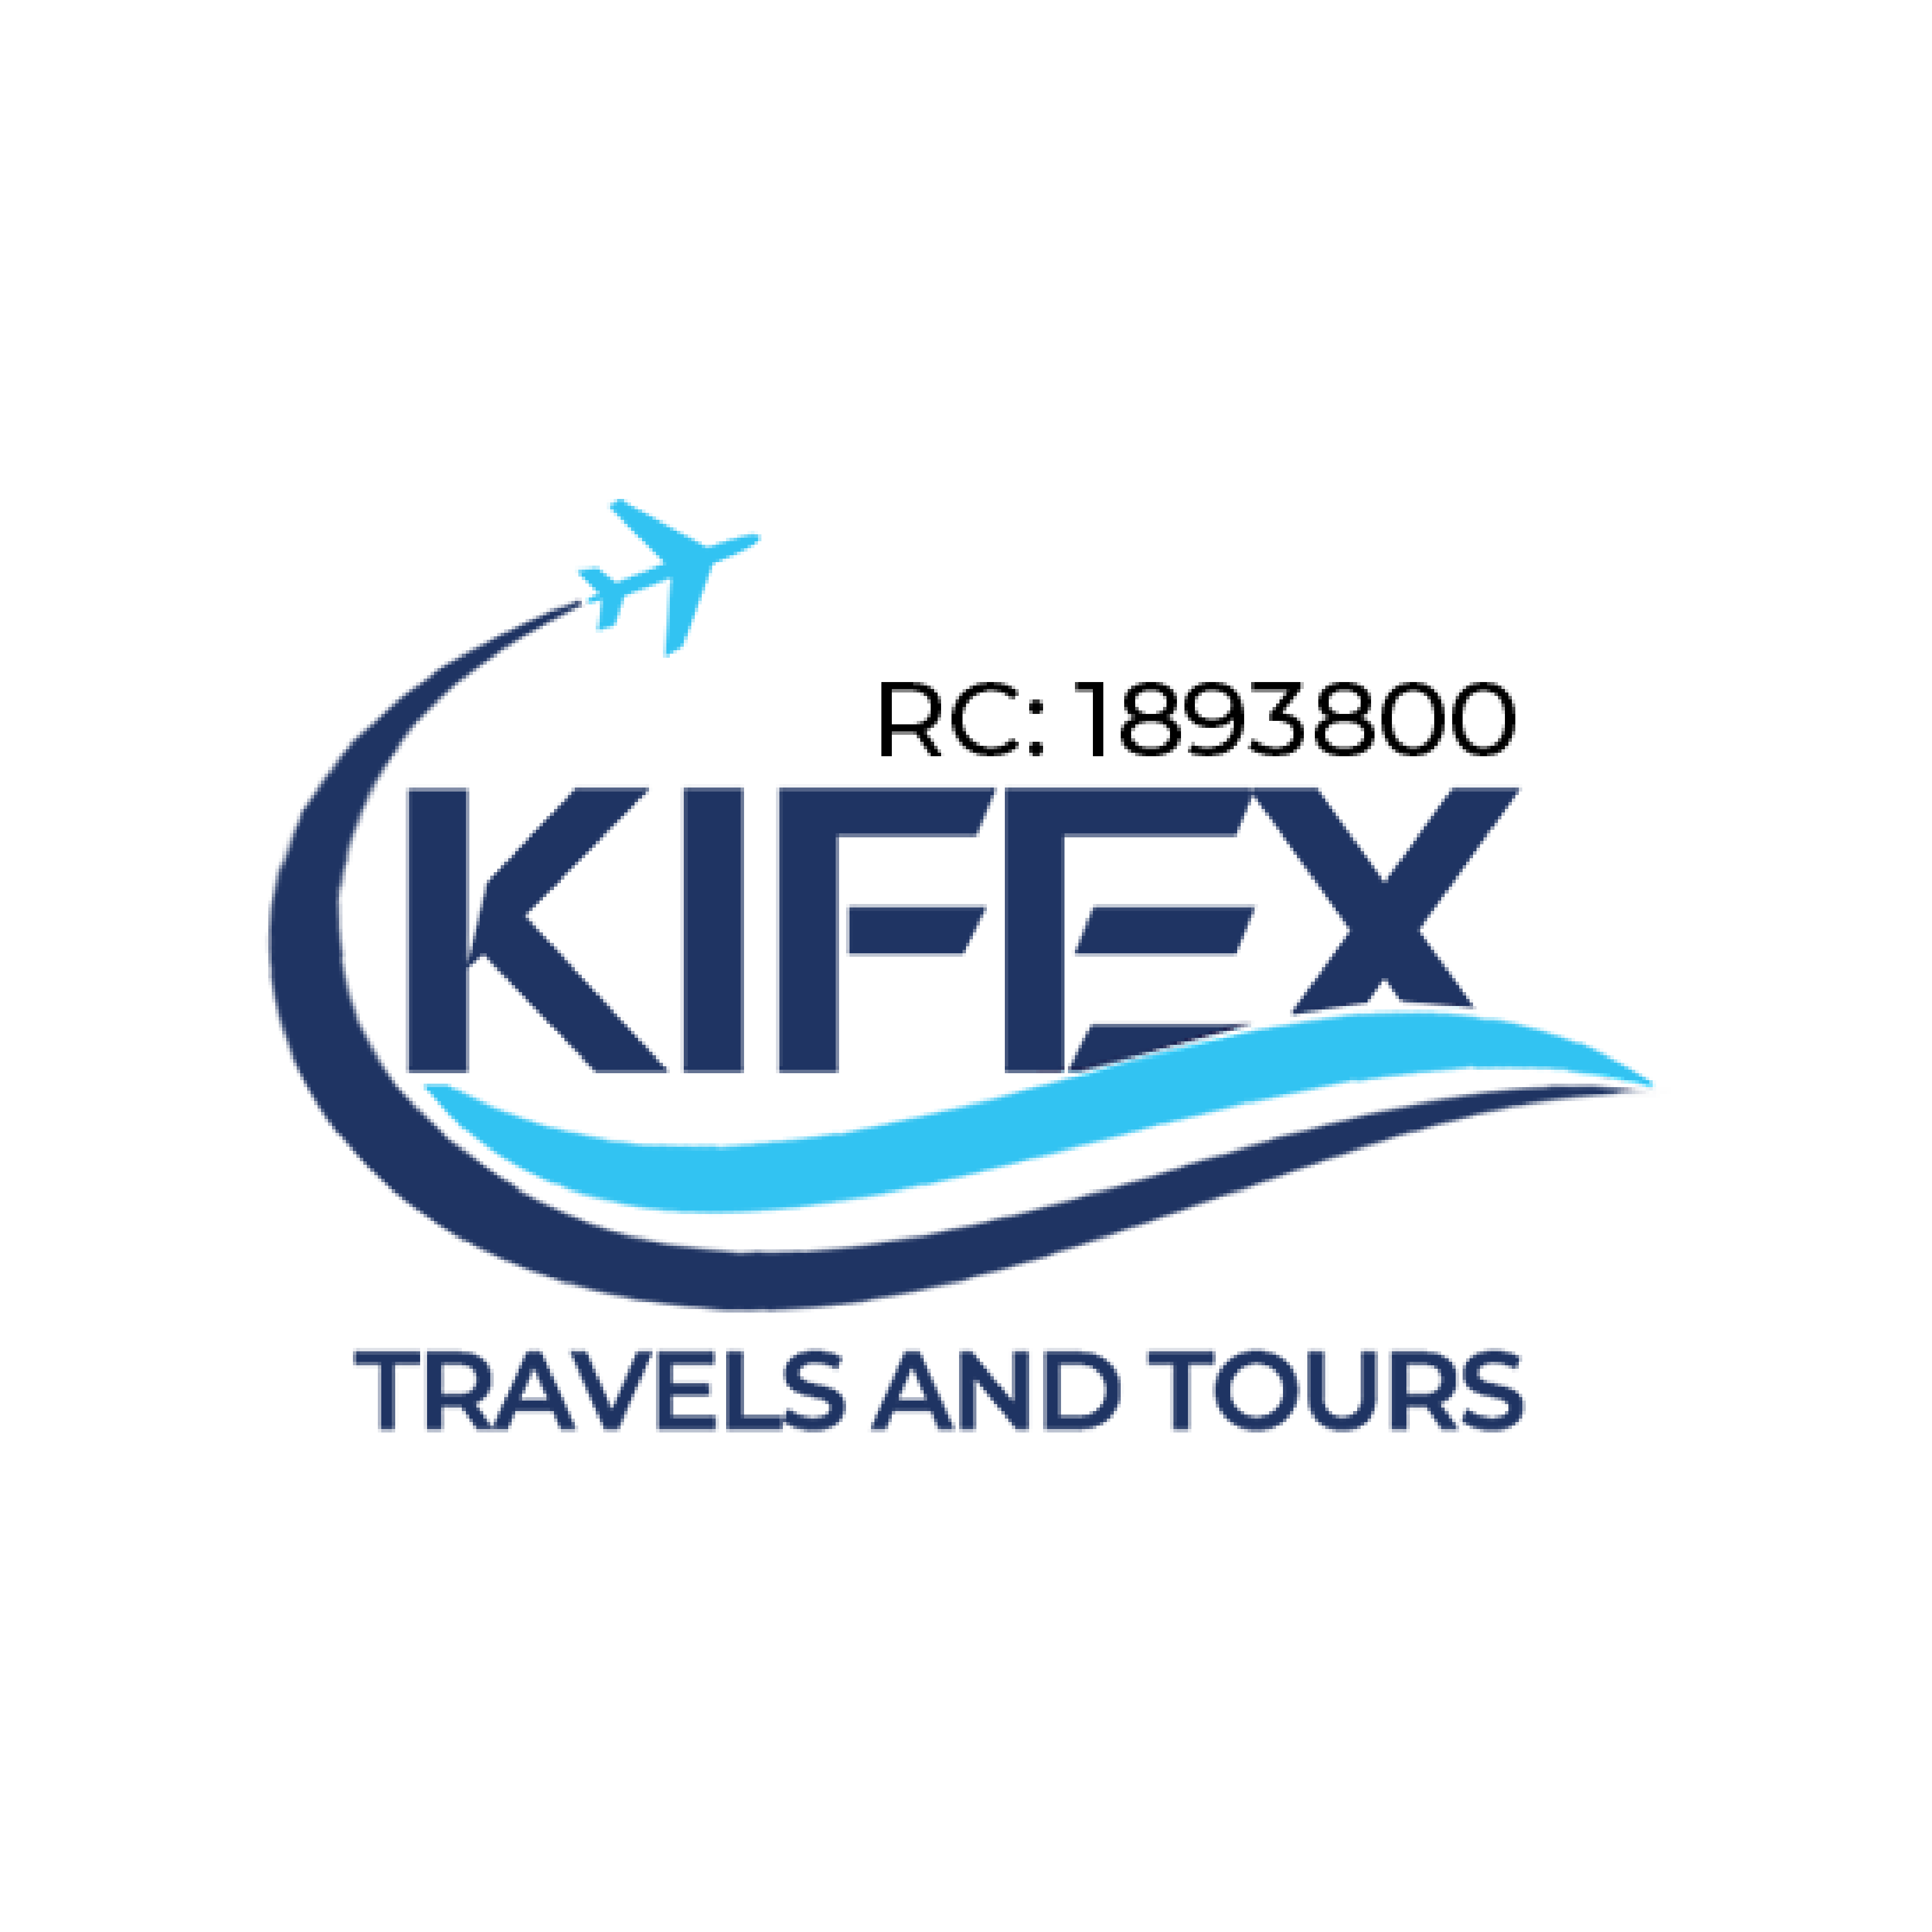 Kifex Travels and Tours